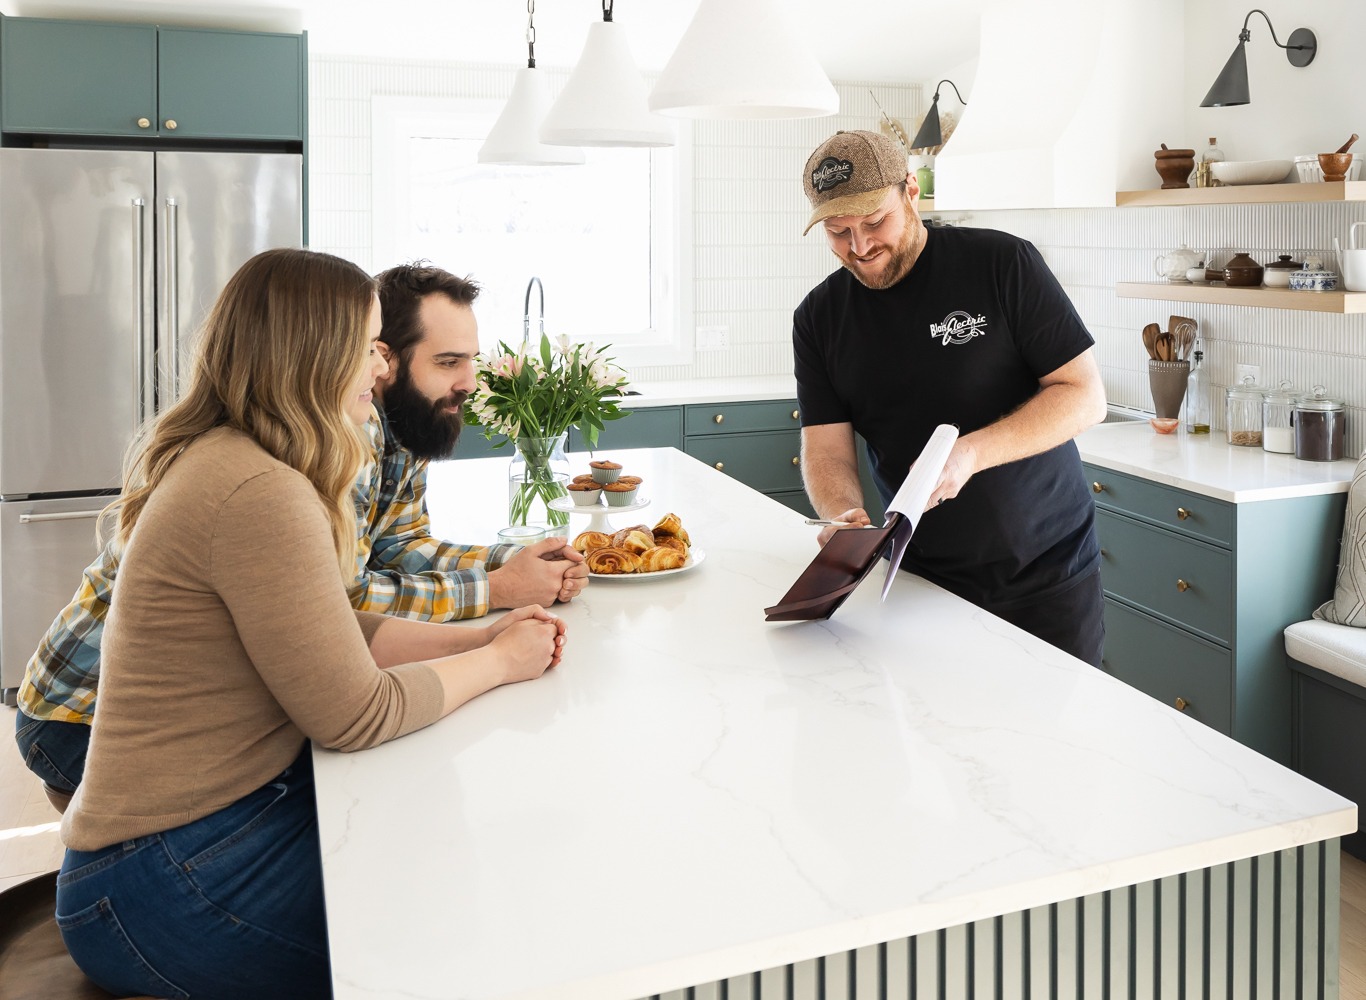 Three people are gathered in a bright, modern kitchen. One person reads a menu while two others sit at a counter with pastries and coffee.